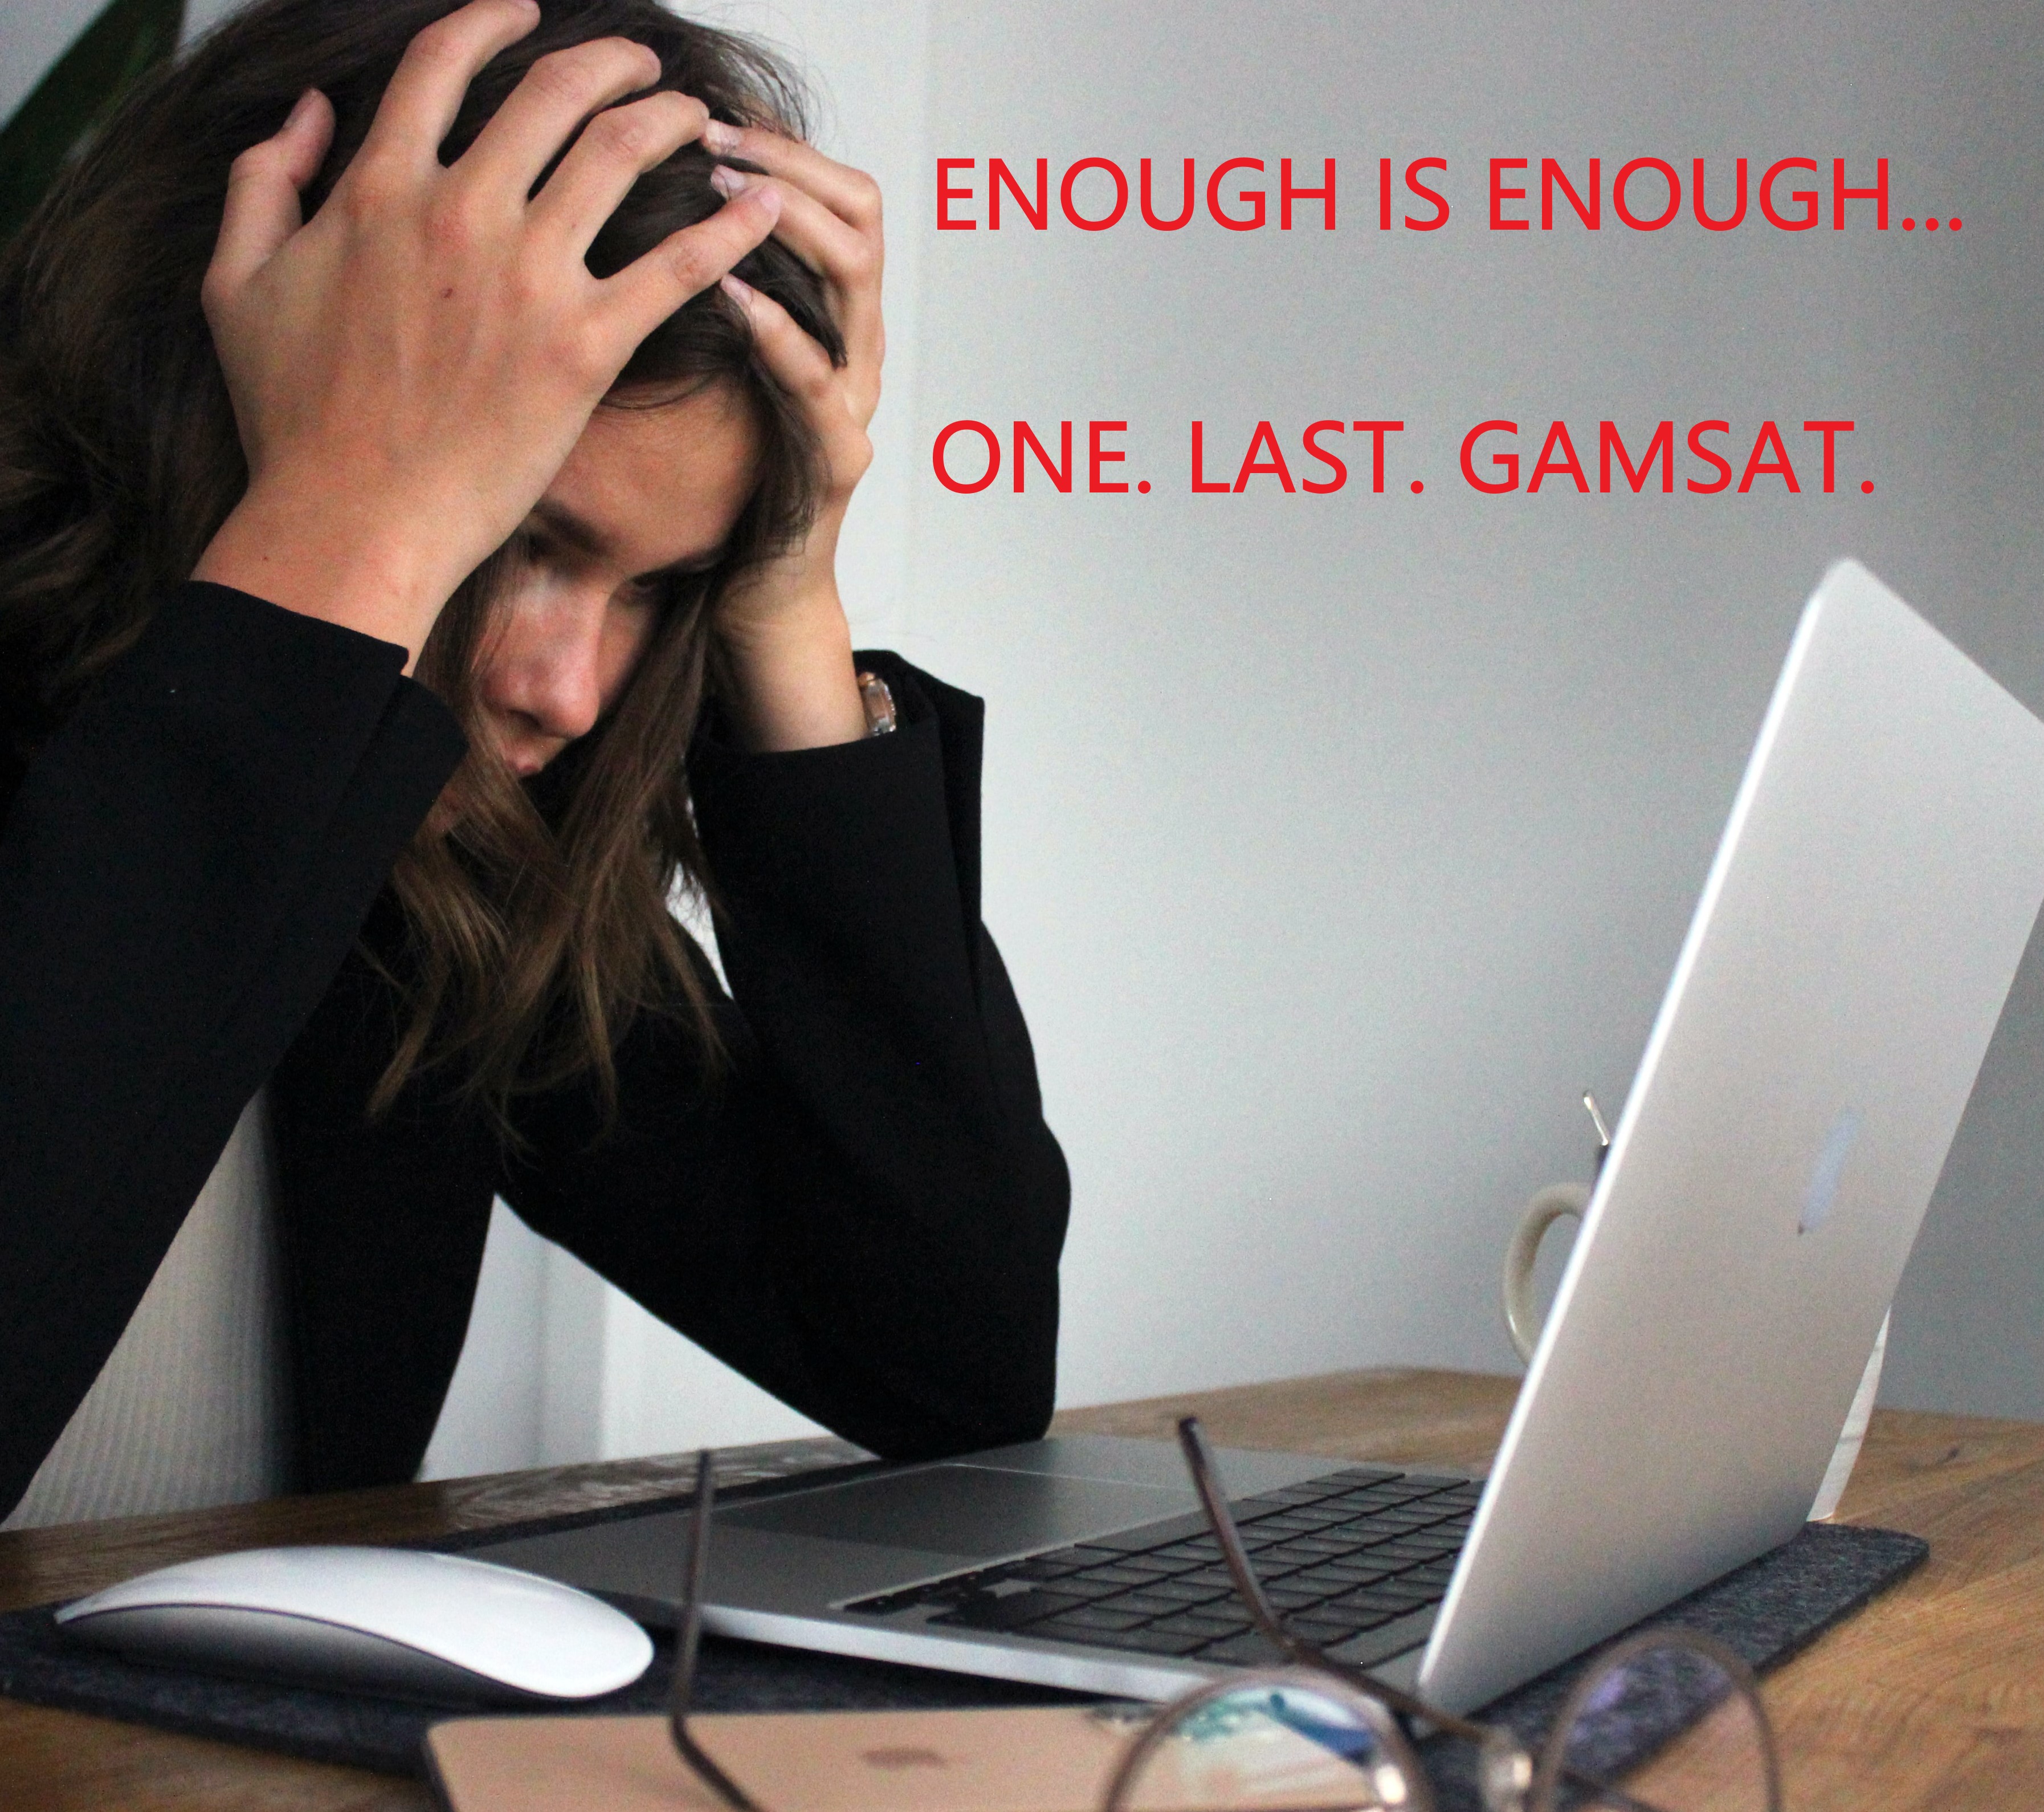 Doing GAMSAT One…Last… Time?